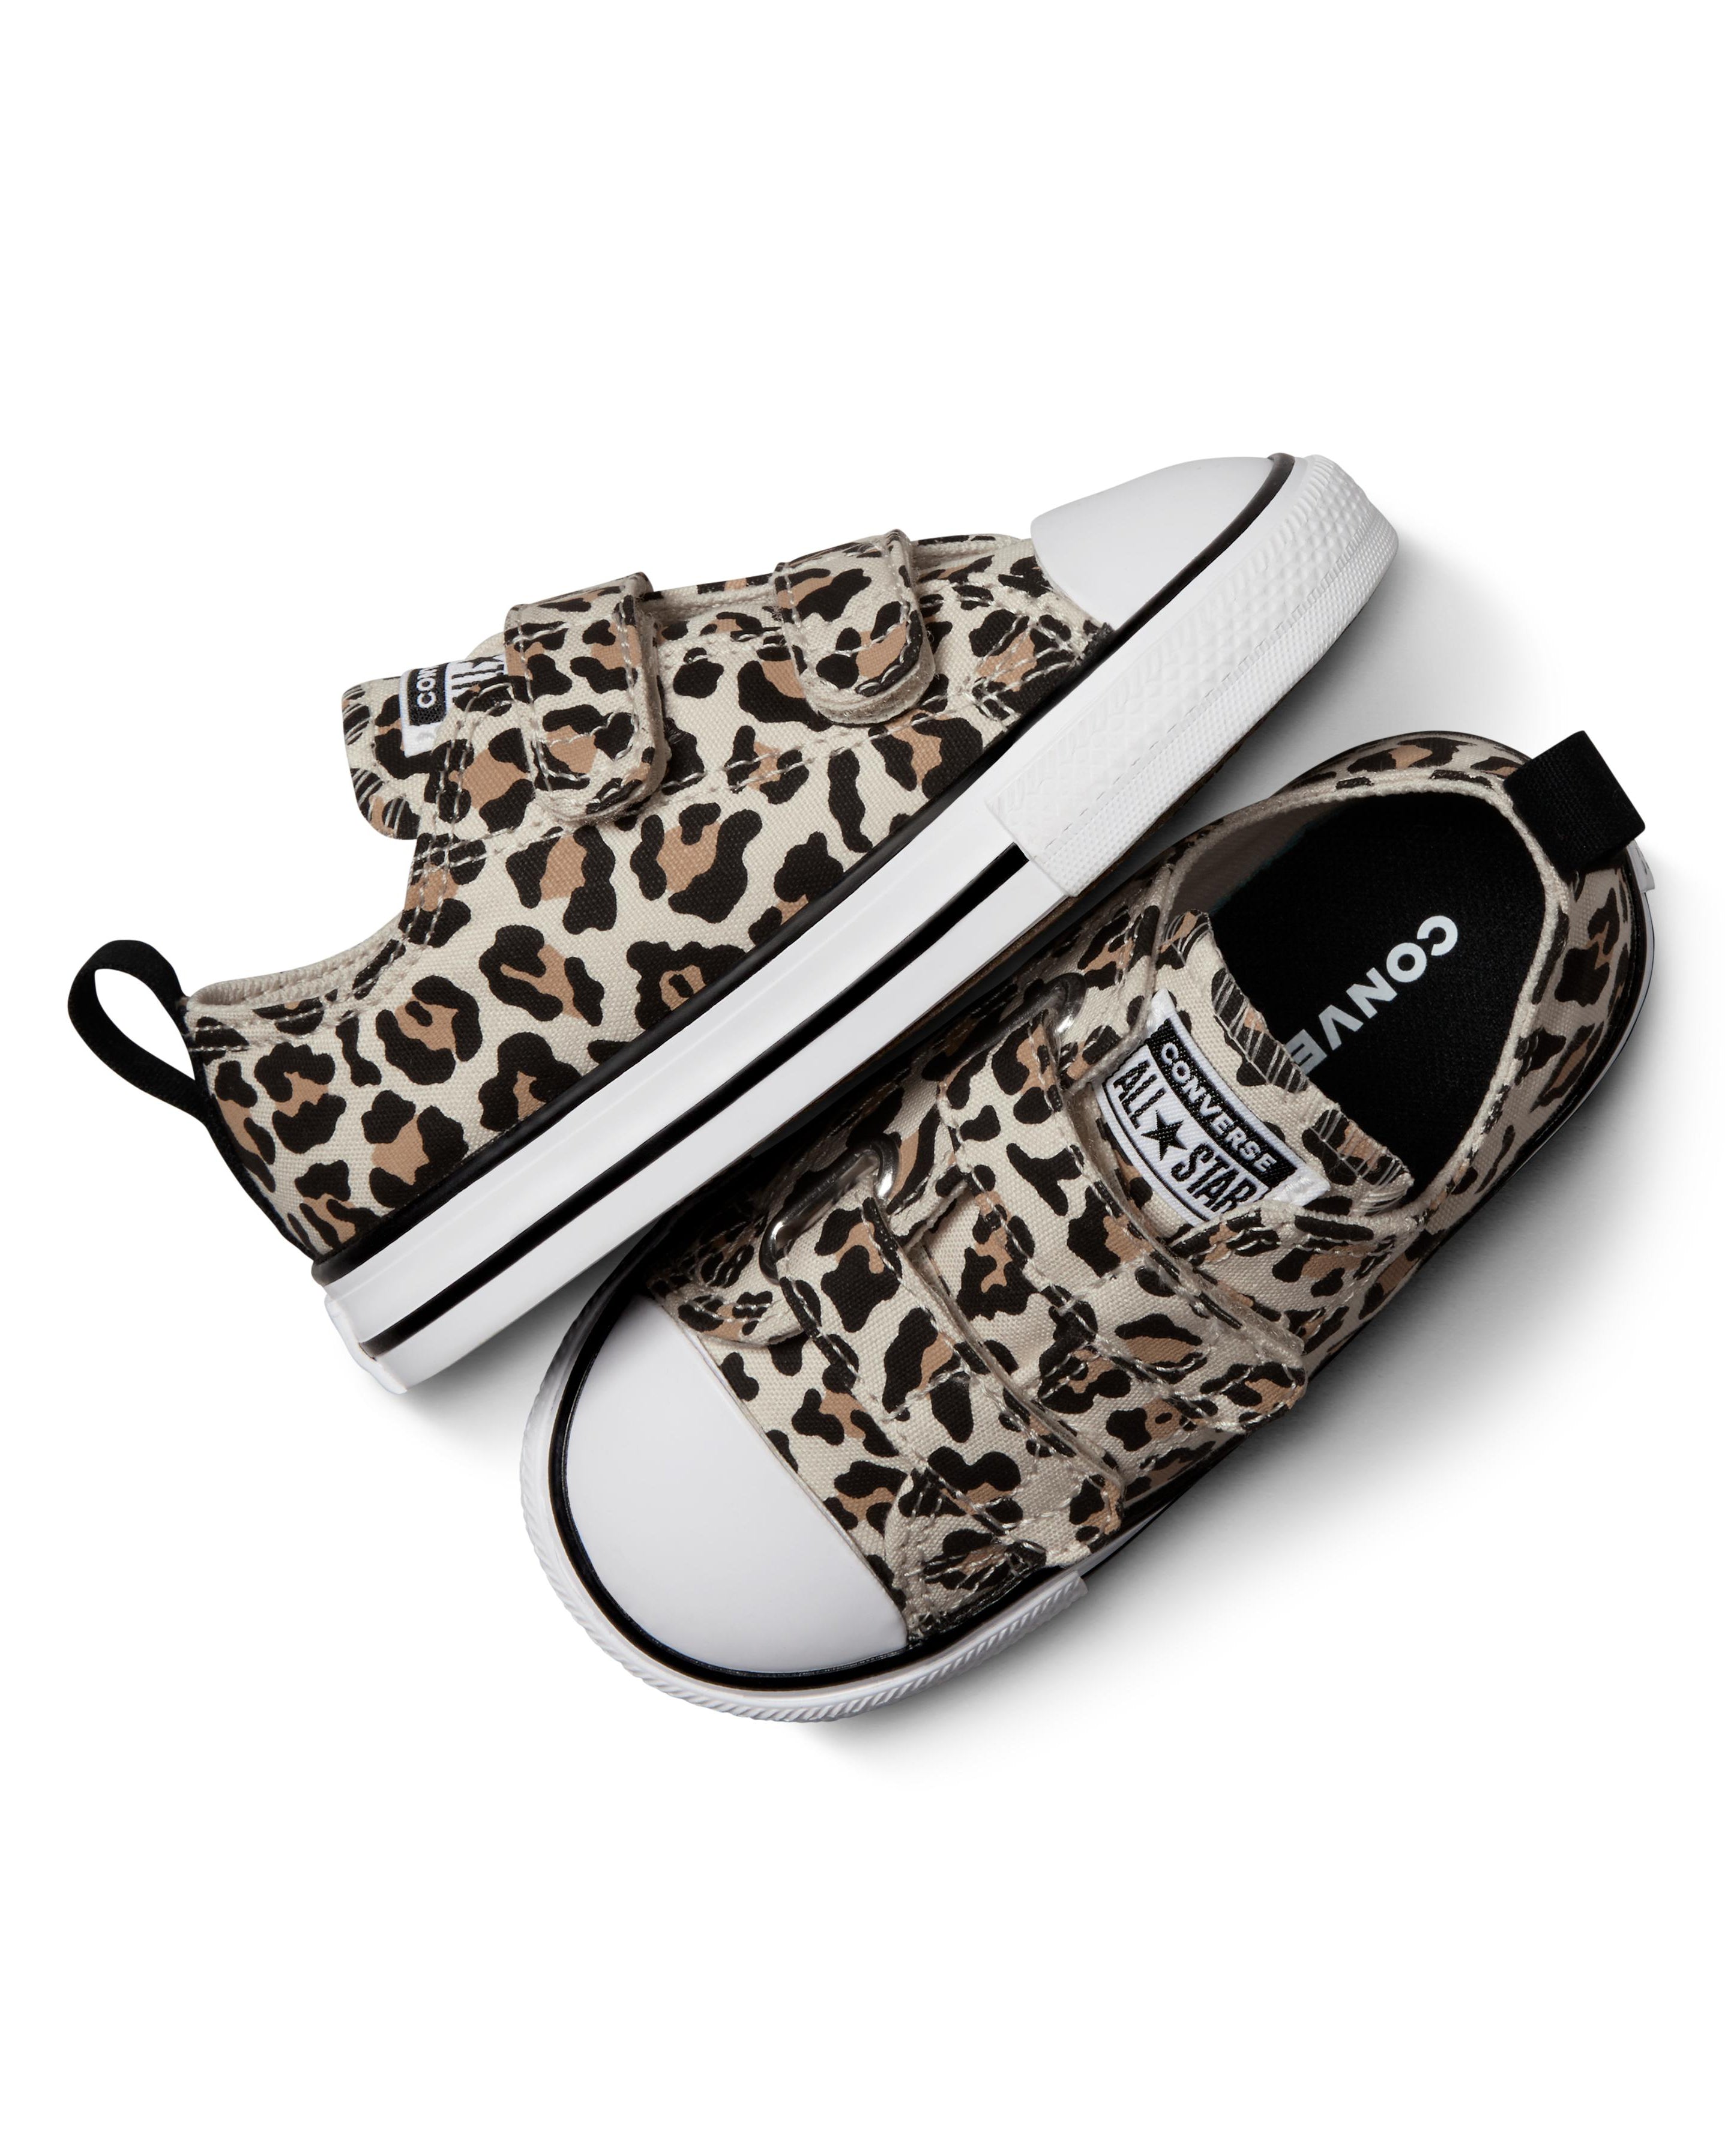 Converse Chuck Taylor All Star Leopard Love 2V Toddler Low Top - Driftwood/Black/White